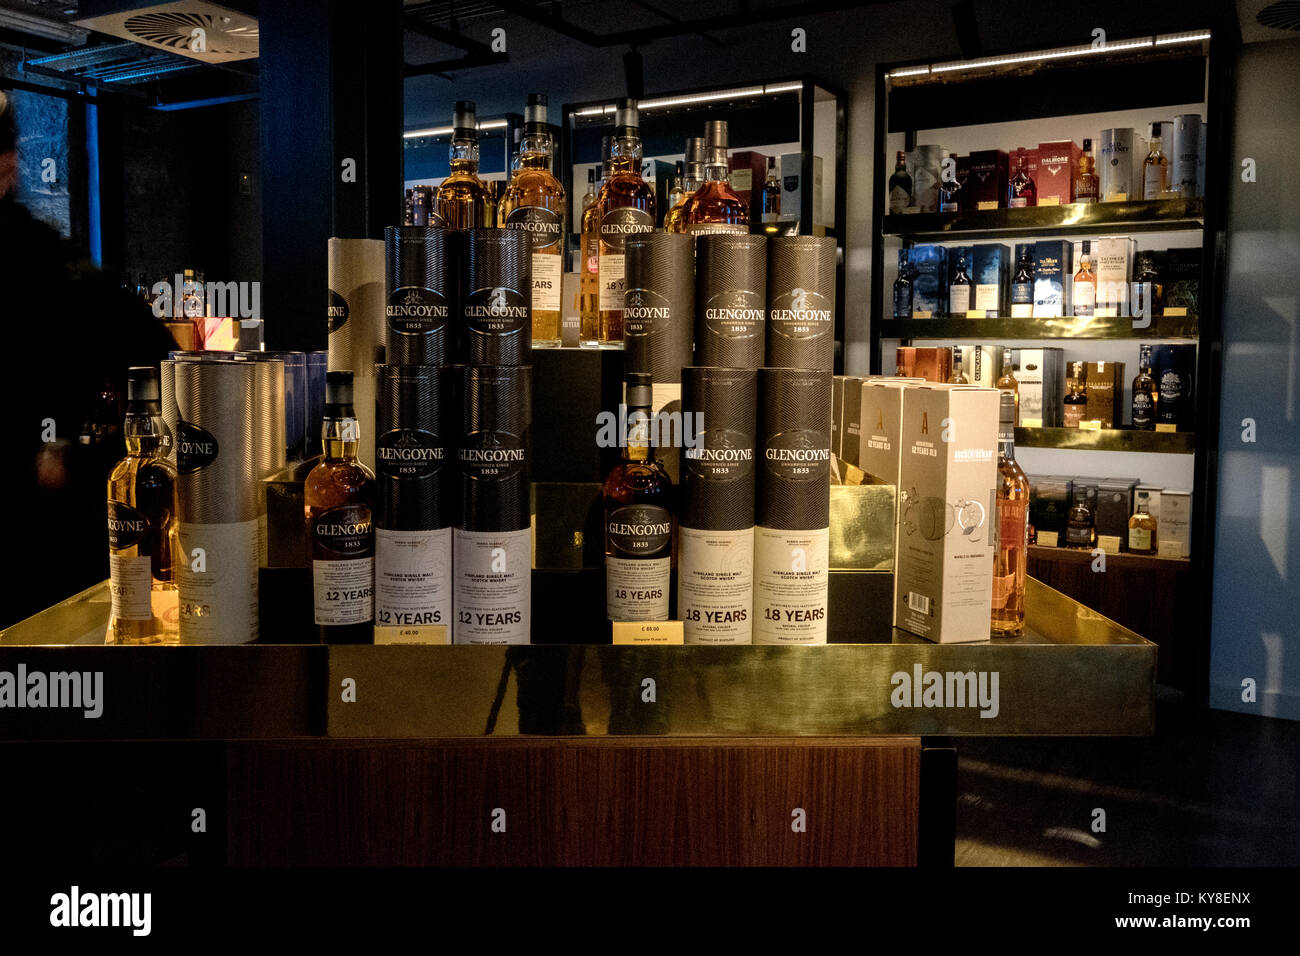 A shop display of whisky bottles Clydeside Distillery, Glasgow, Scotland Stock Photo